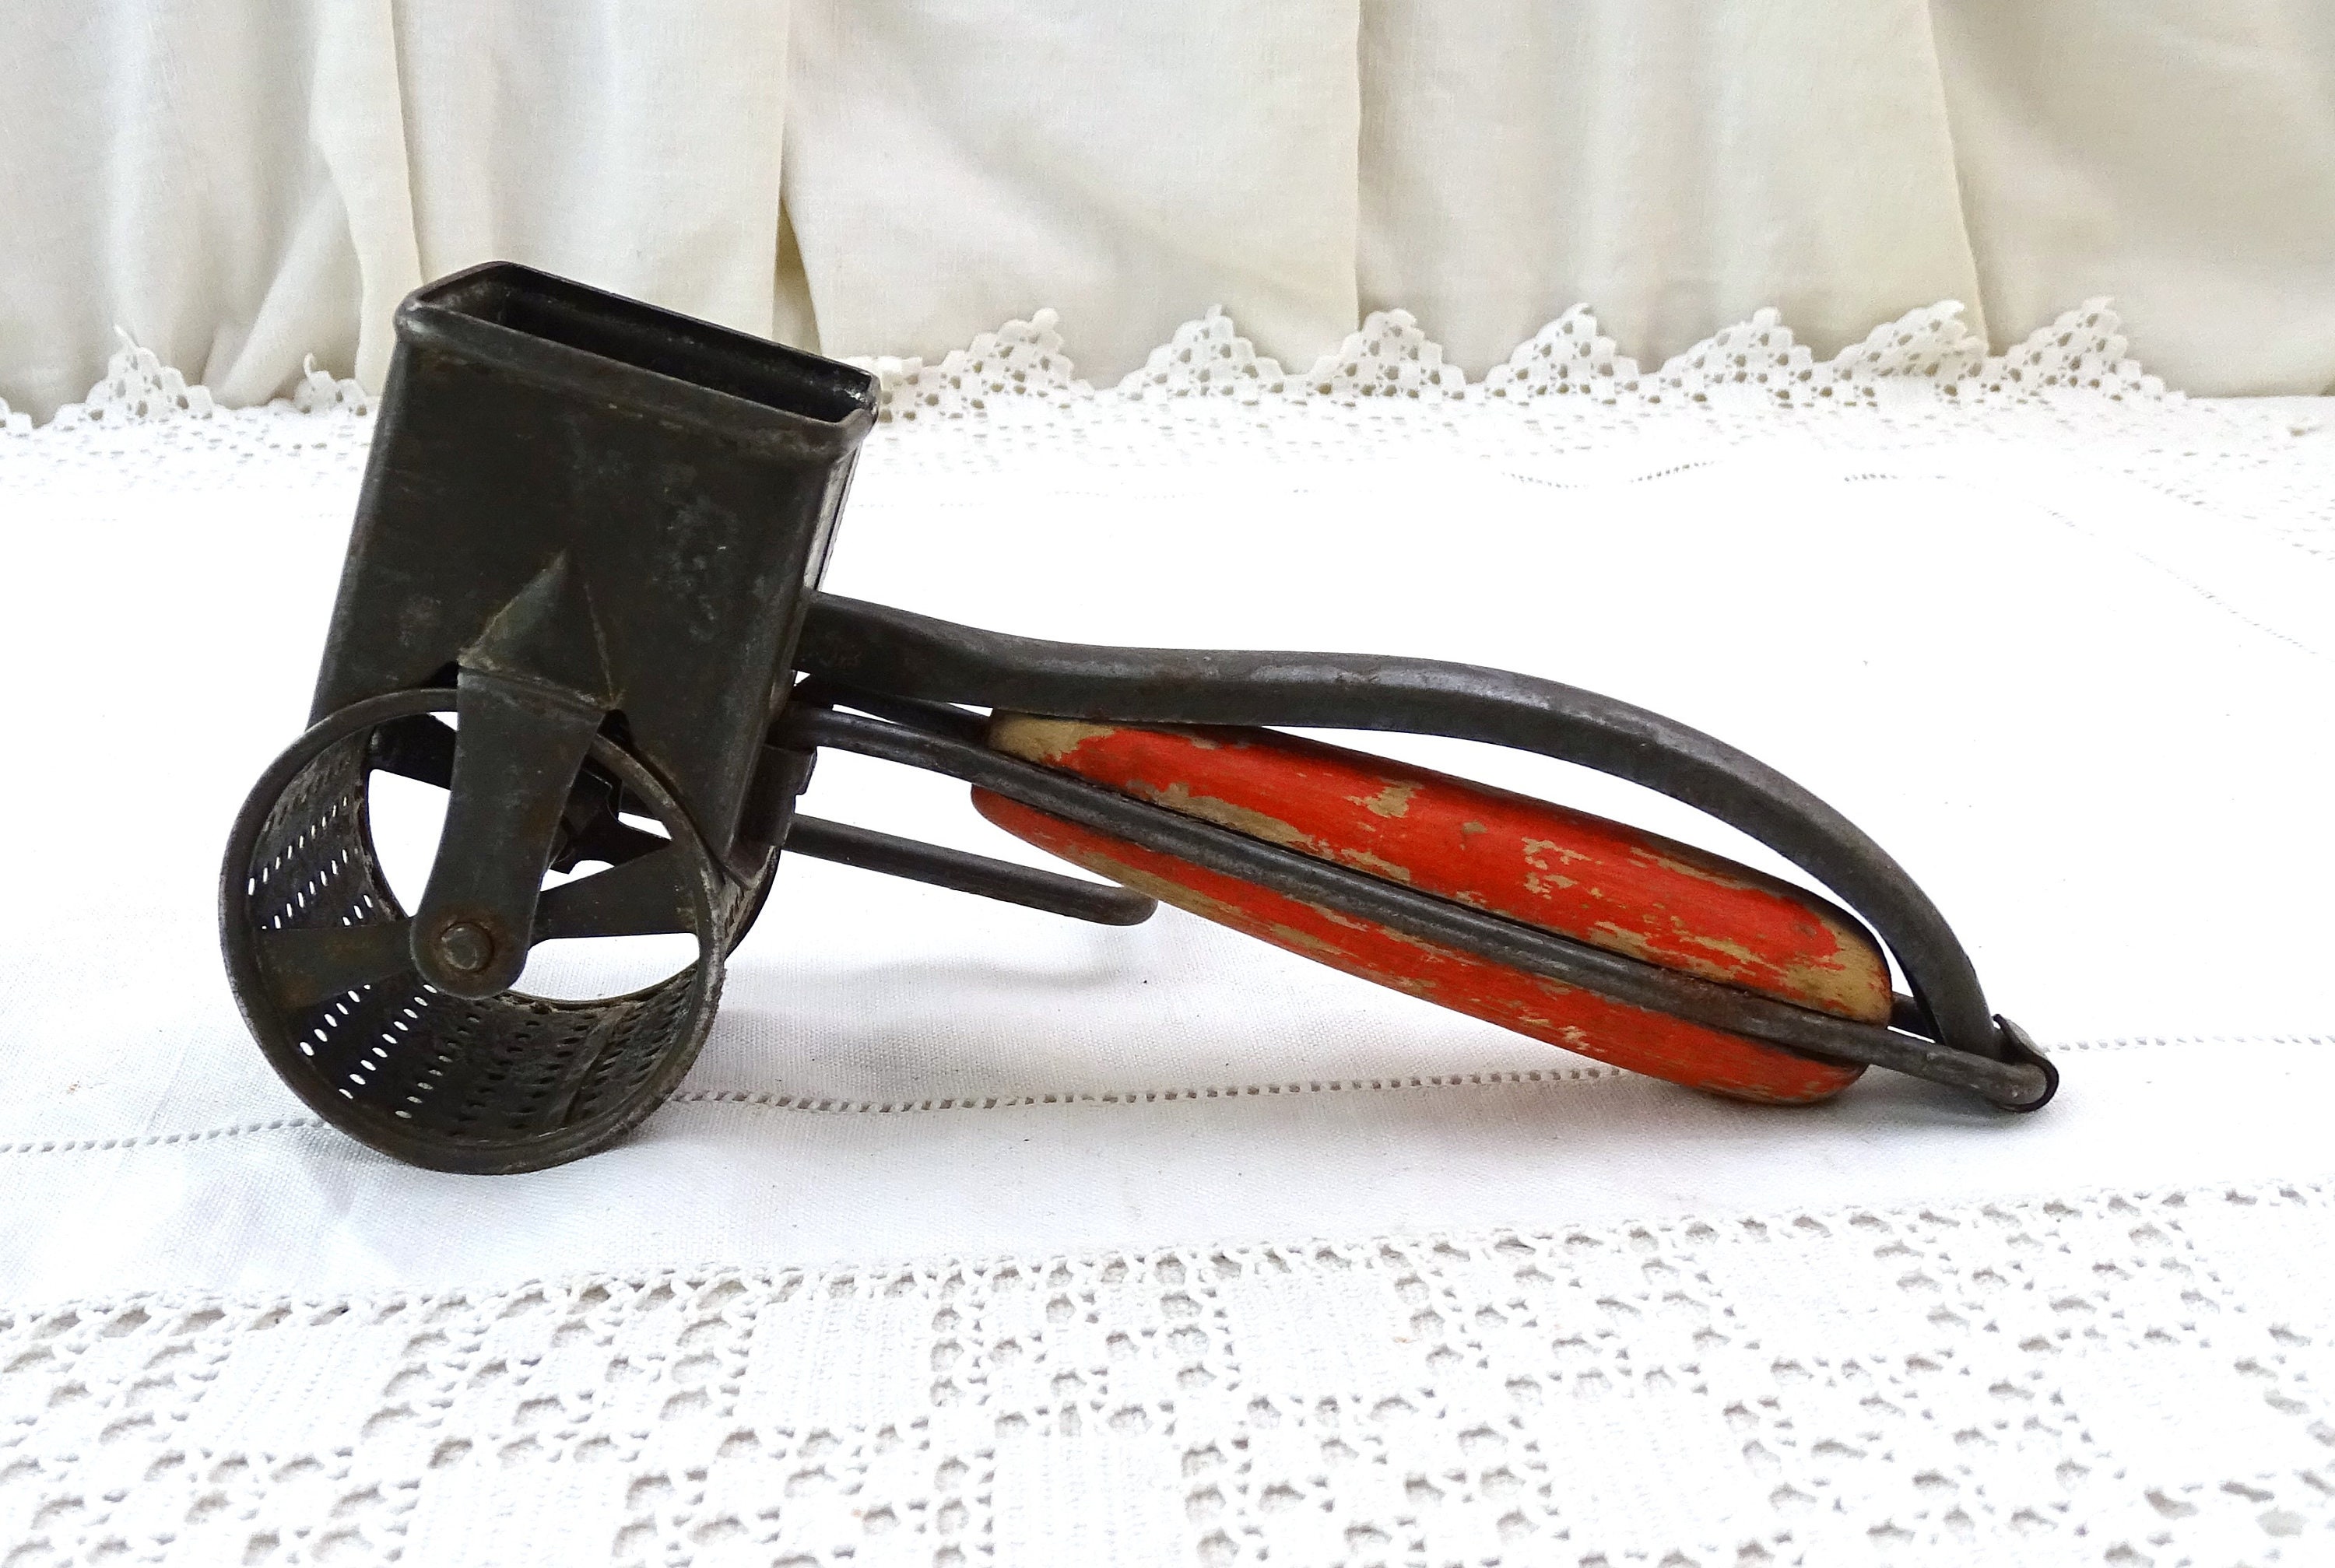 Vintage Mouli Hand Cheese Multi Purpose Hand Crank Grater Made in